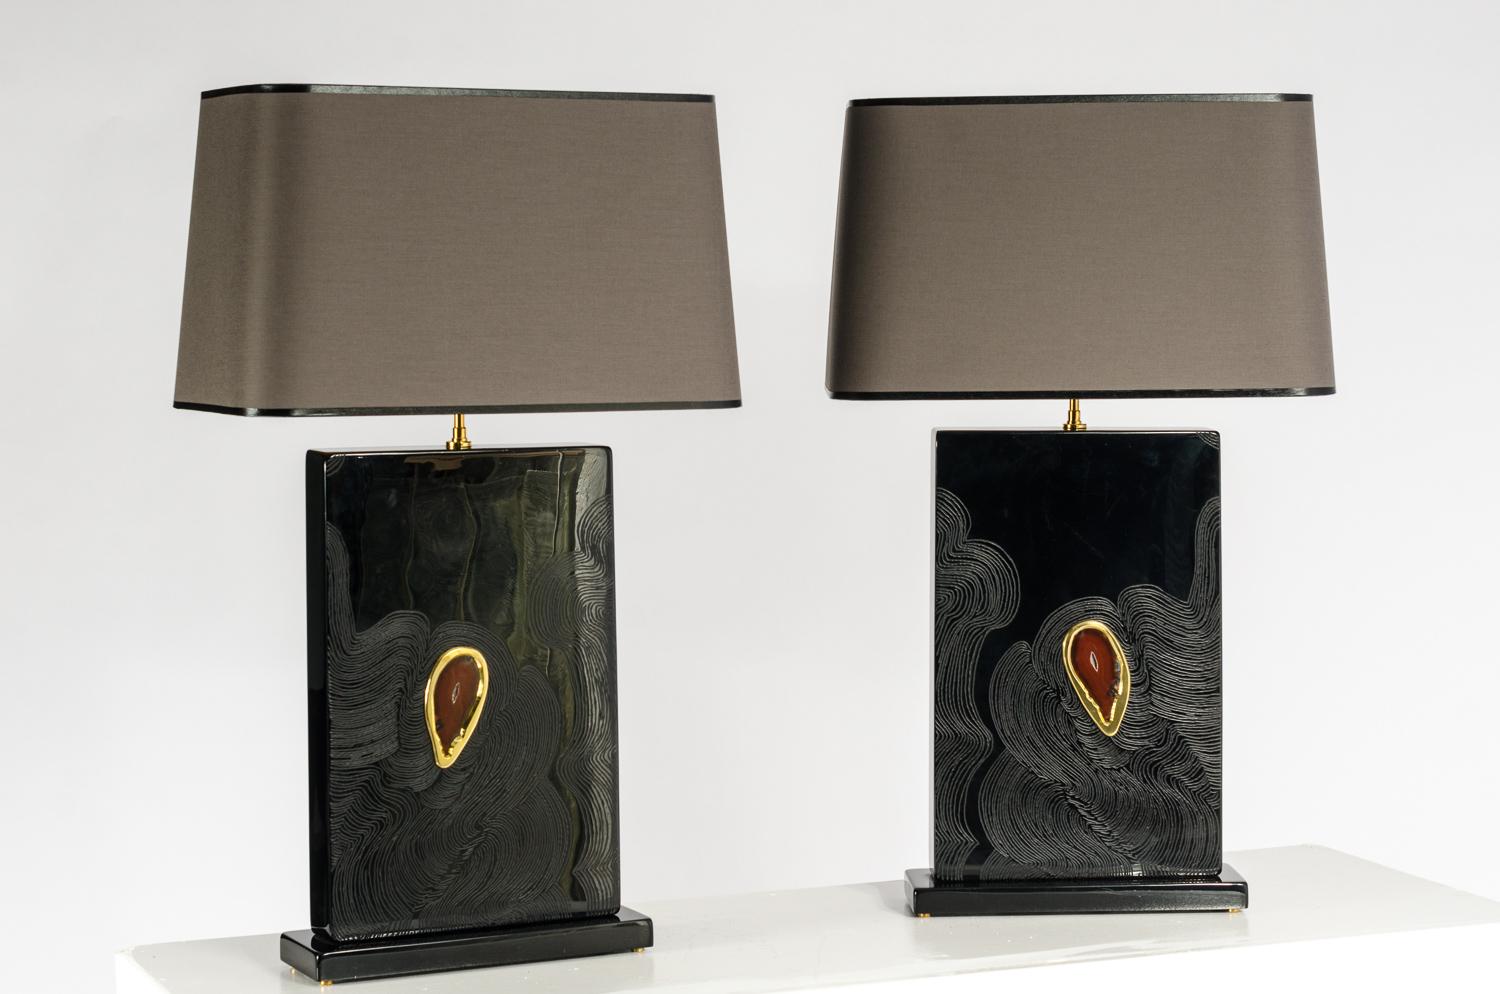 One of a kind studio built pair of Table Lamps (right and left)  in black resin with inlaid agates by Stan Usel.
Exceptional craftsmanship. All pieces can be custom made to order. Signed by the artist, circa 2020.
Dimentions with shades: 24cm X 58cm